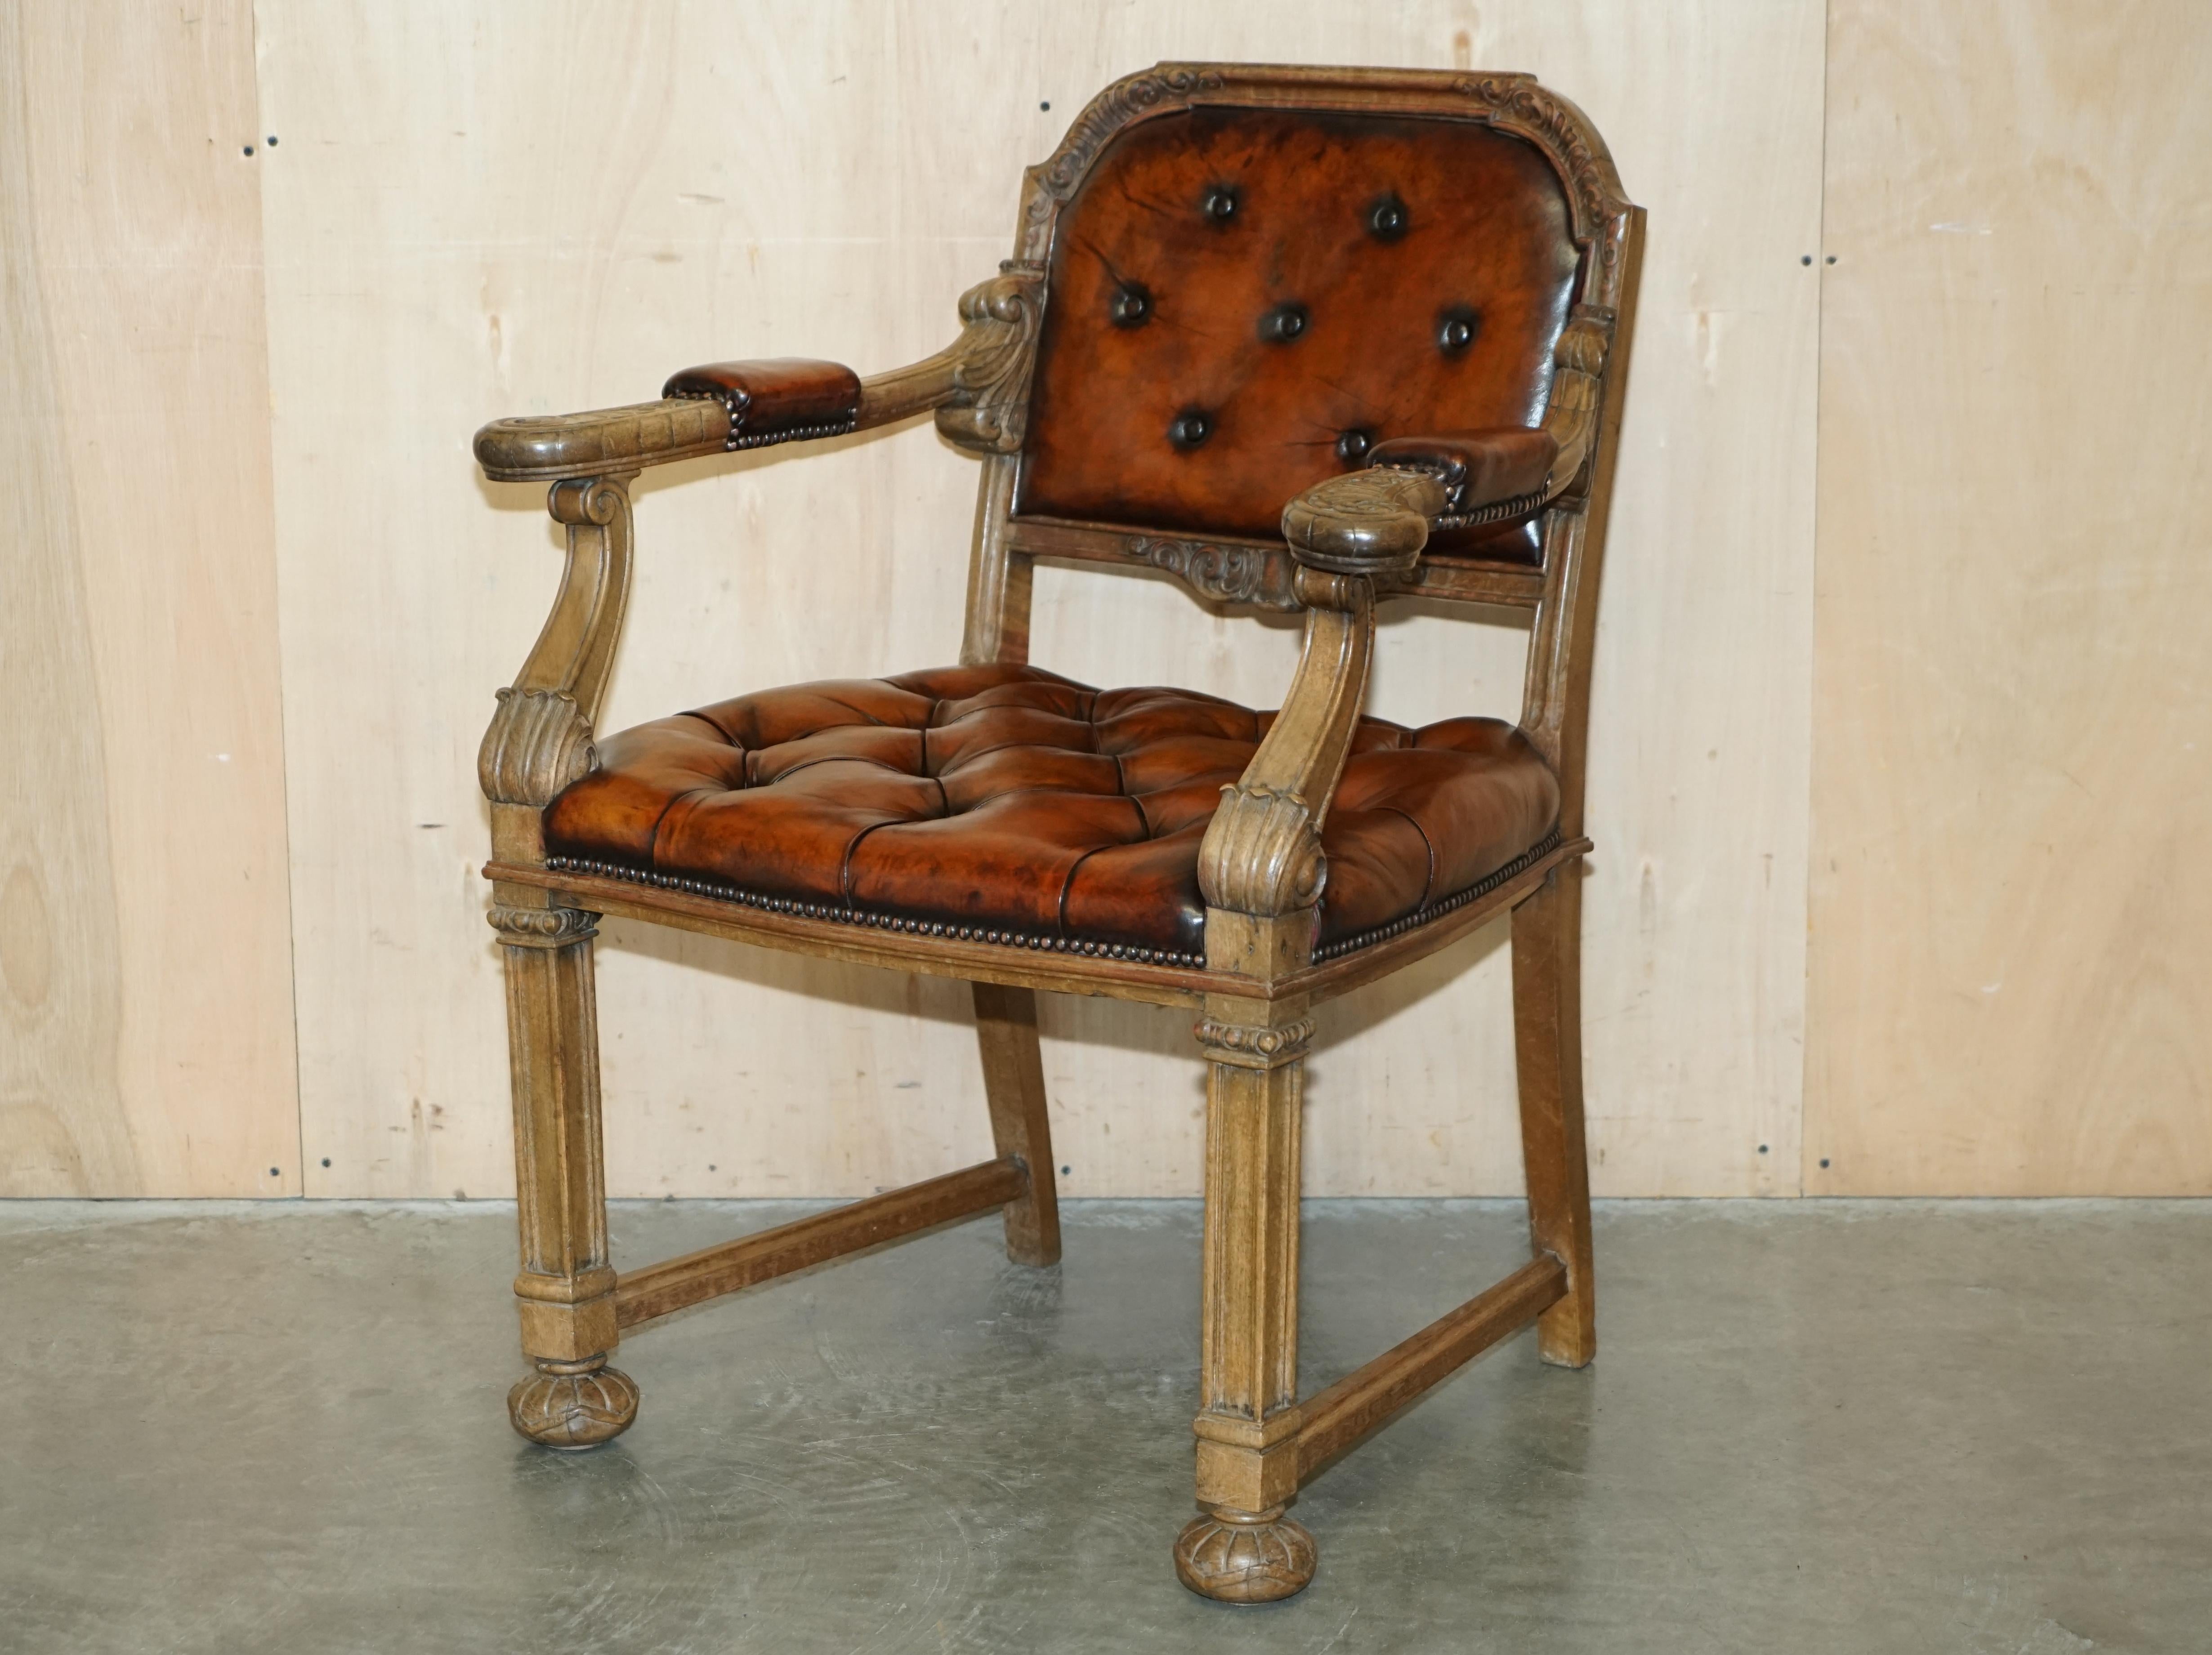 Royal House Antiques

Royal House Antiques is delighted to offer for sale this absolutely exquisite and very well made, English circa 1830 William IV limed oak and leather, chesterfield desk chair with heavily carved frame

Please note the delivery